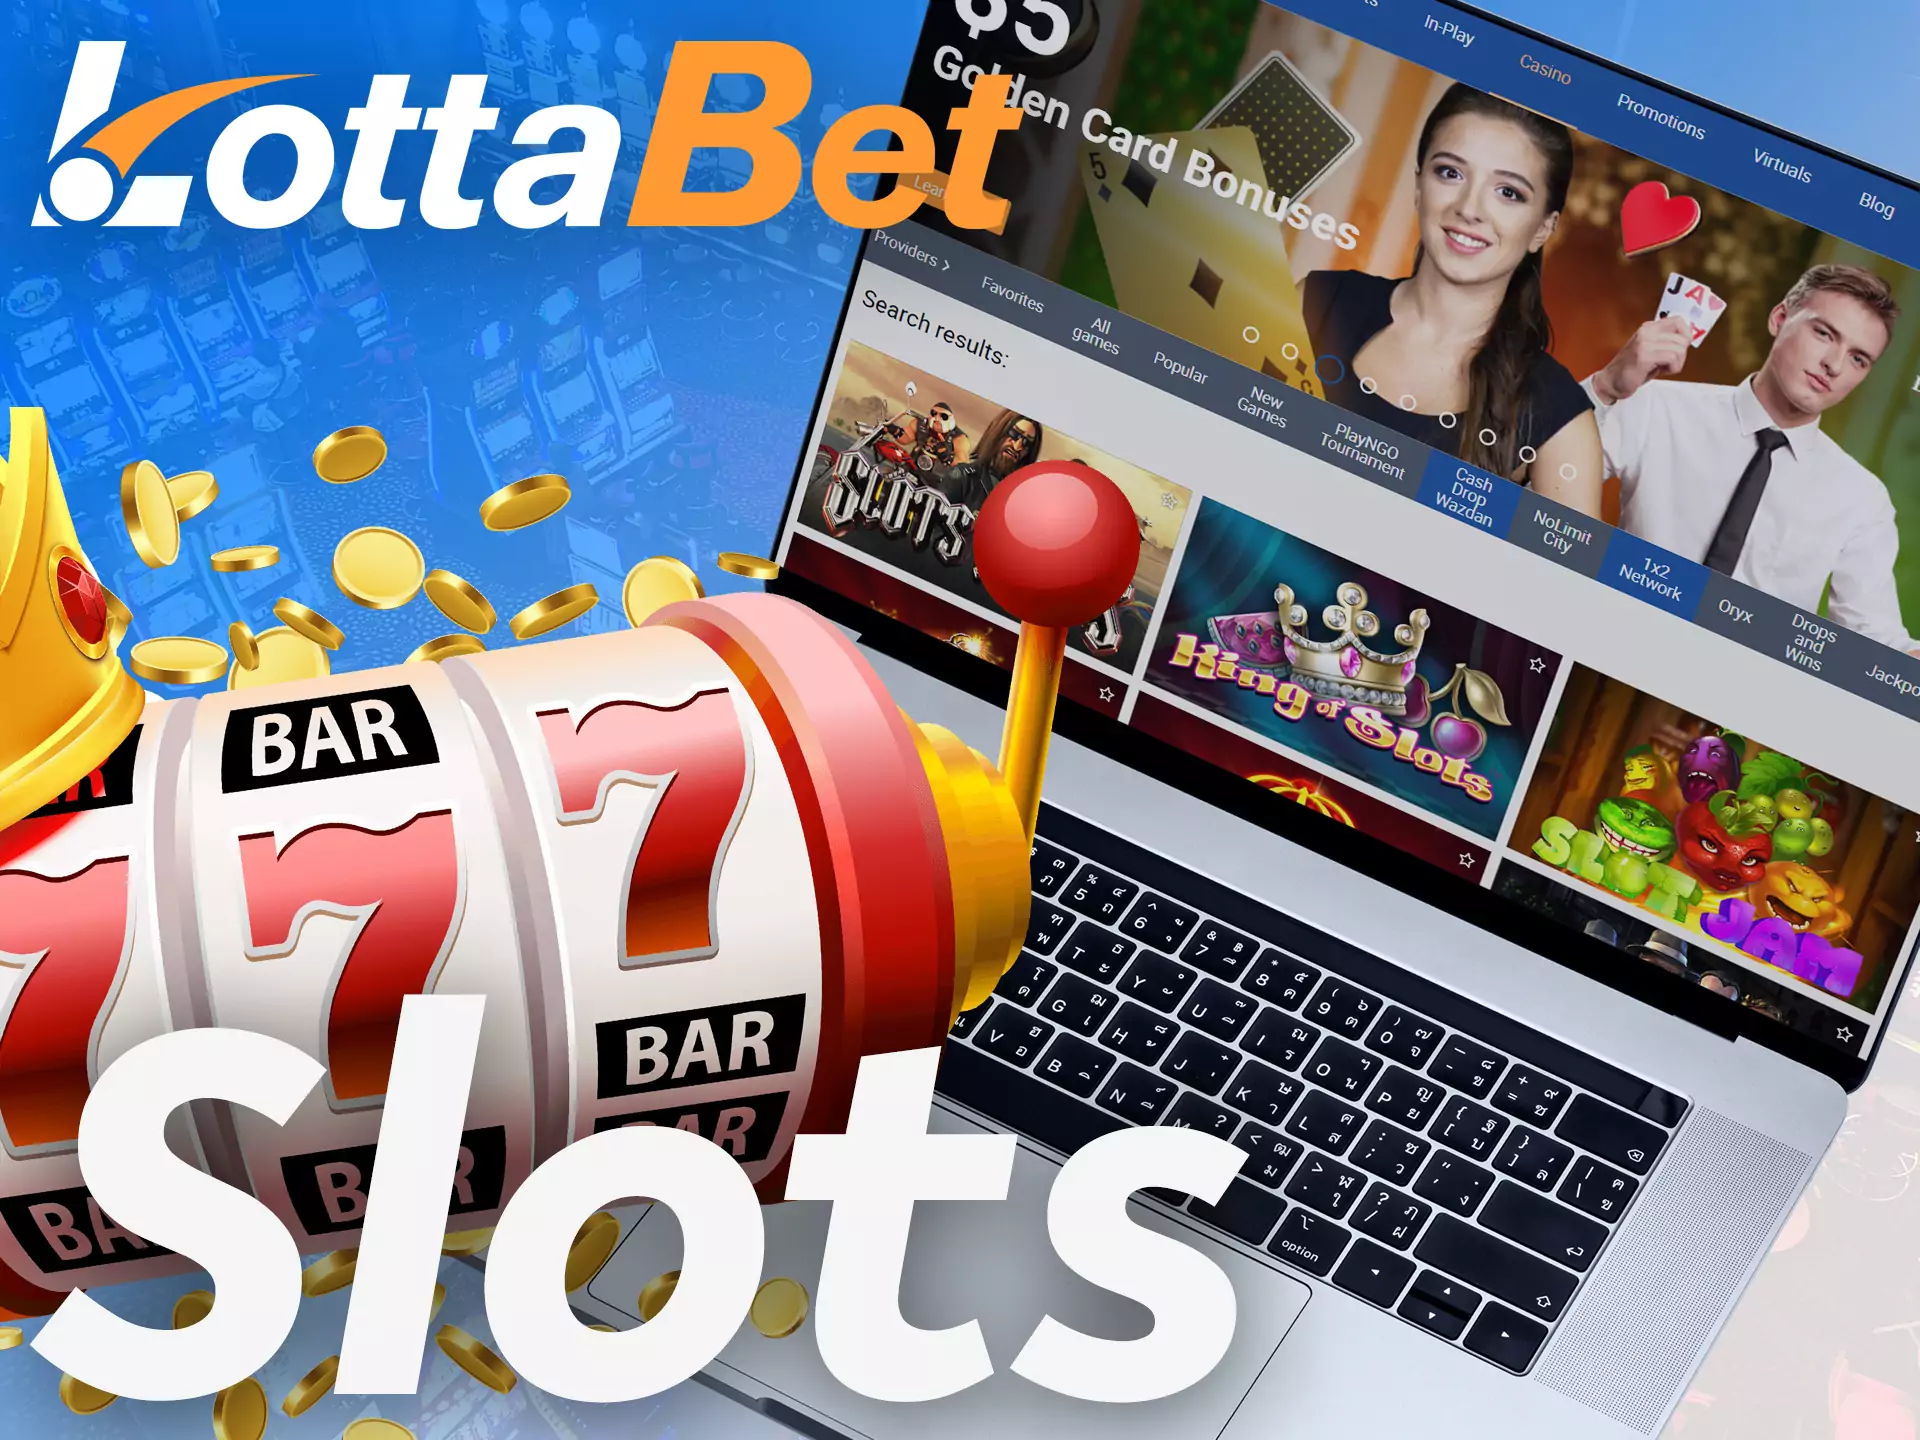 There are a lot of colourful and exciting slot games in the Lottabet Online Casino.